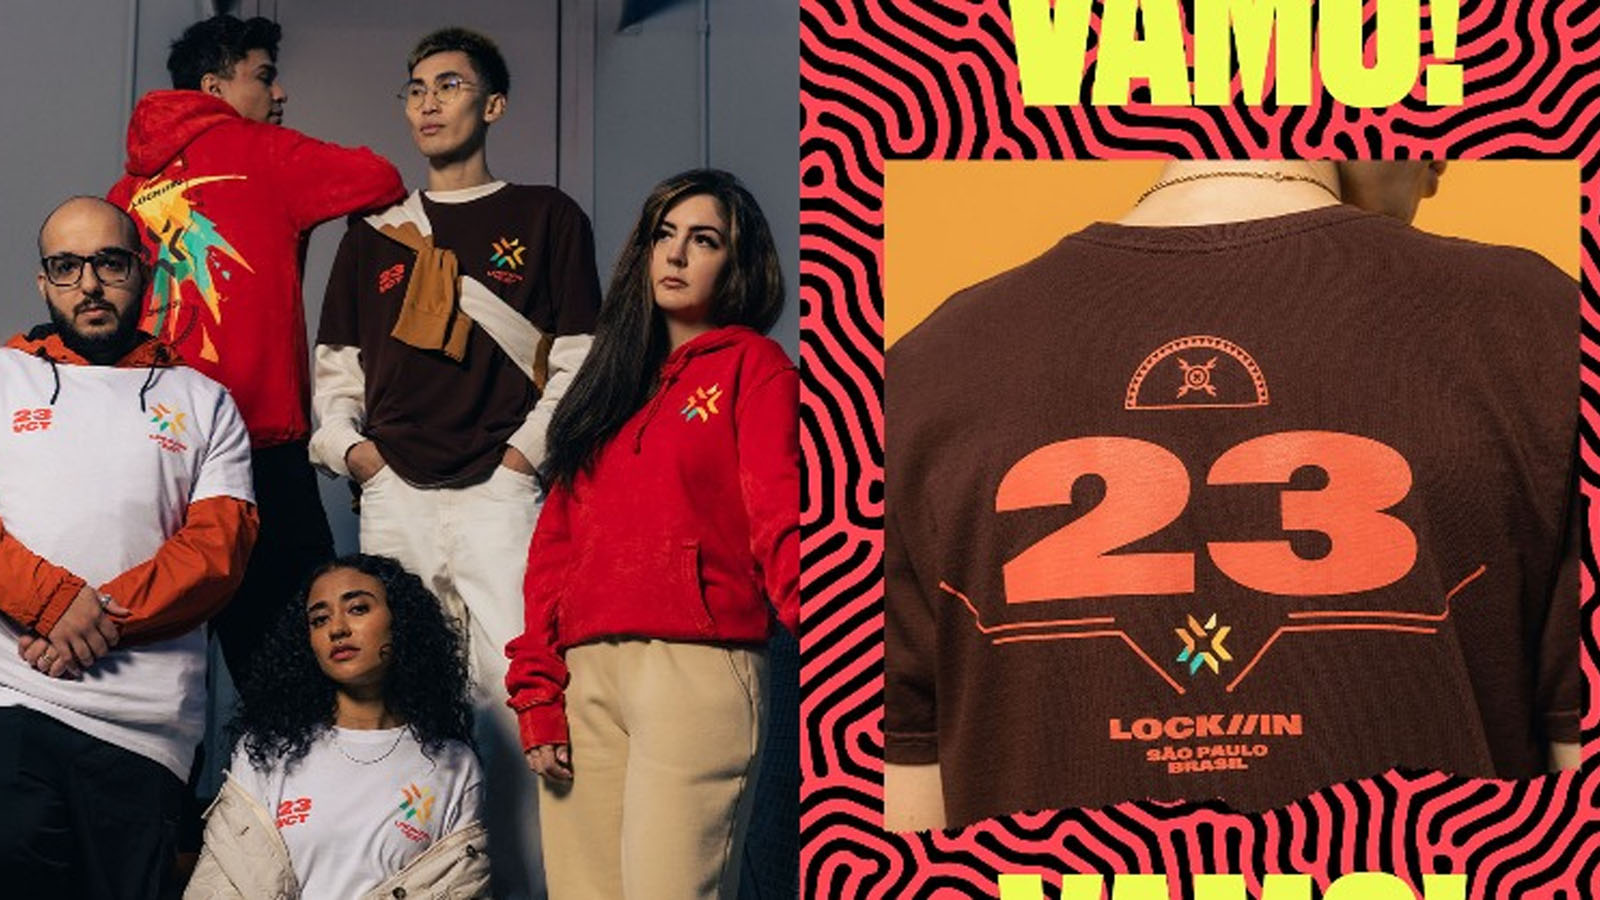 The new limited edition VCT Lock In merch will make you cry Vamos! - ONE Esports